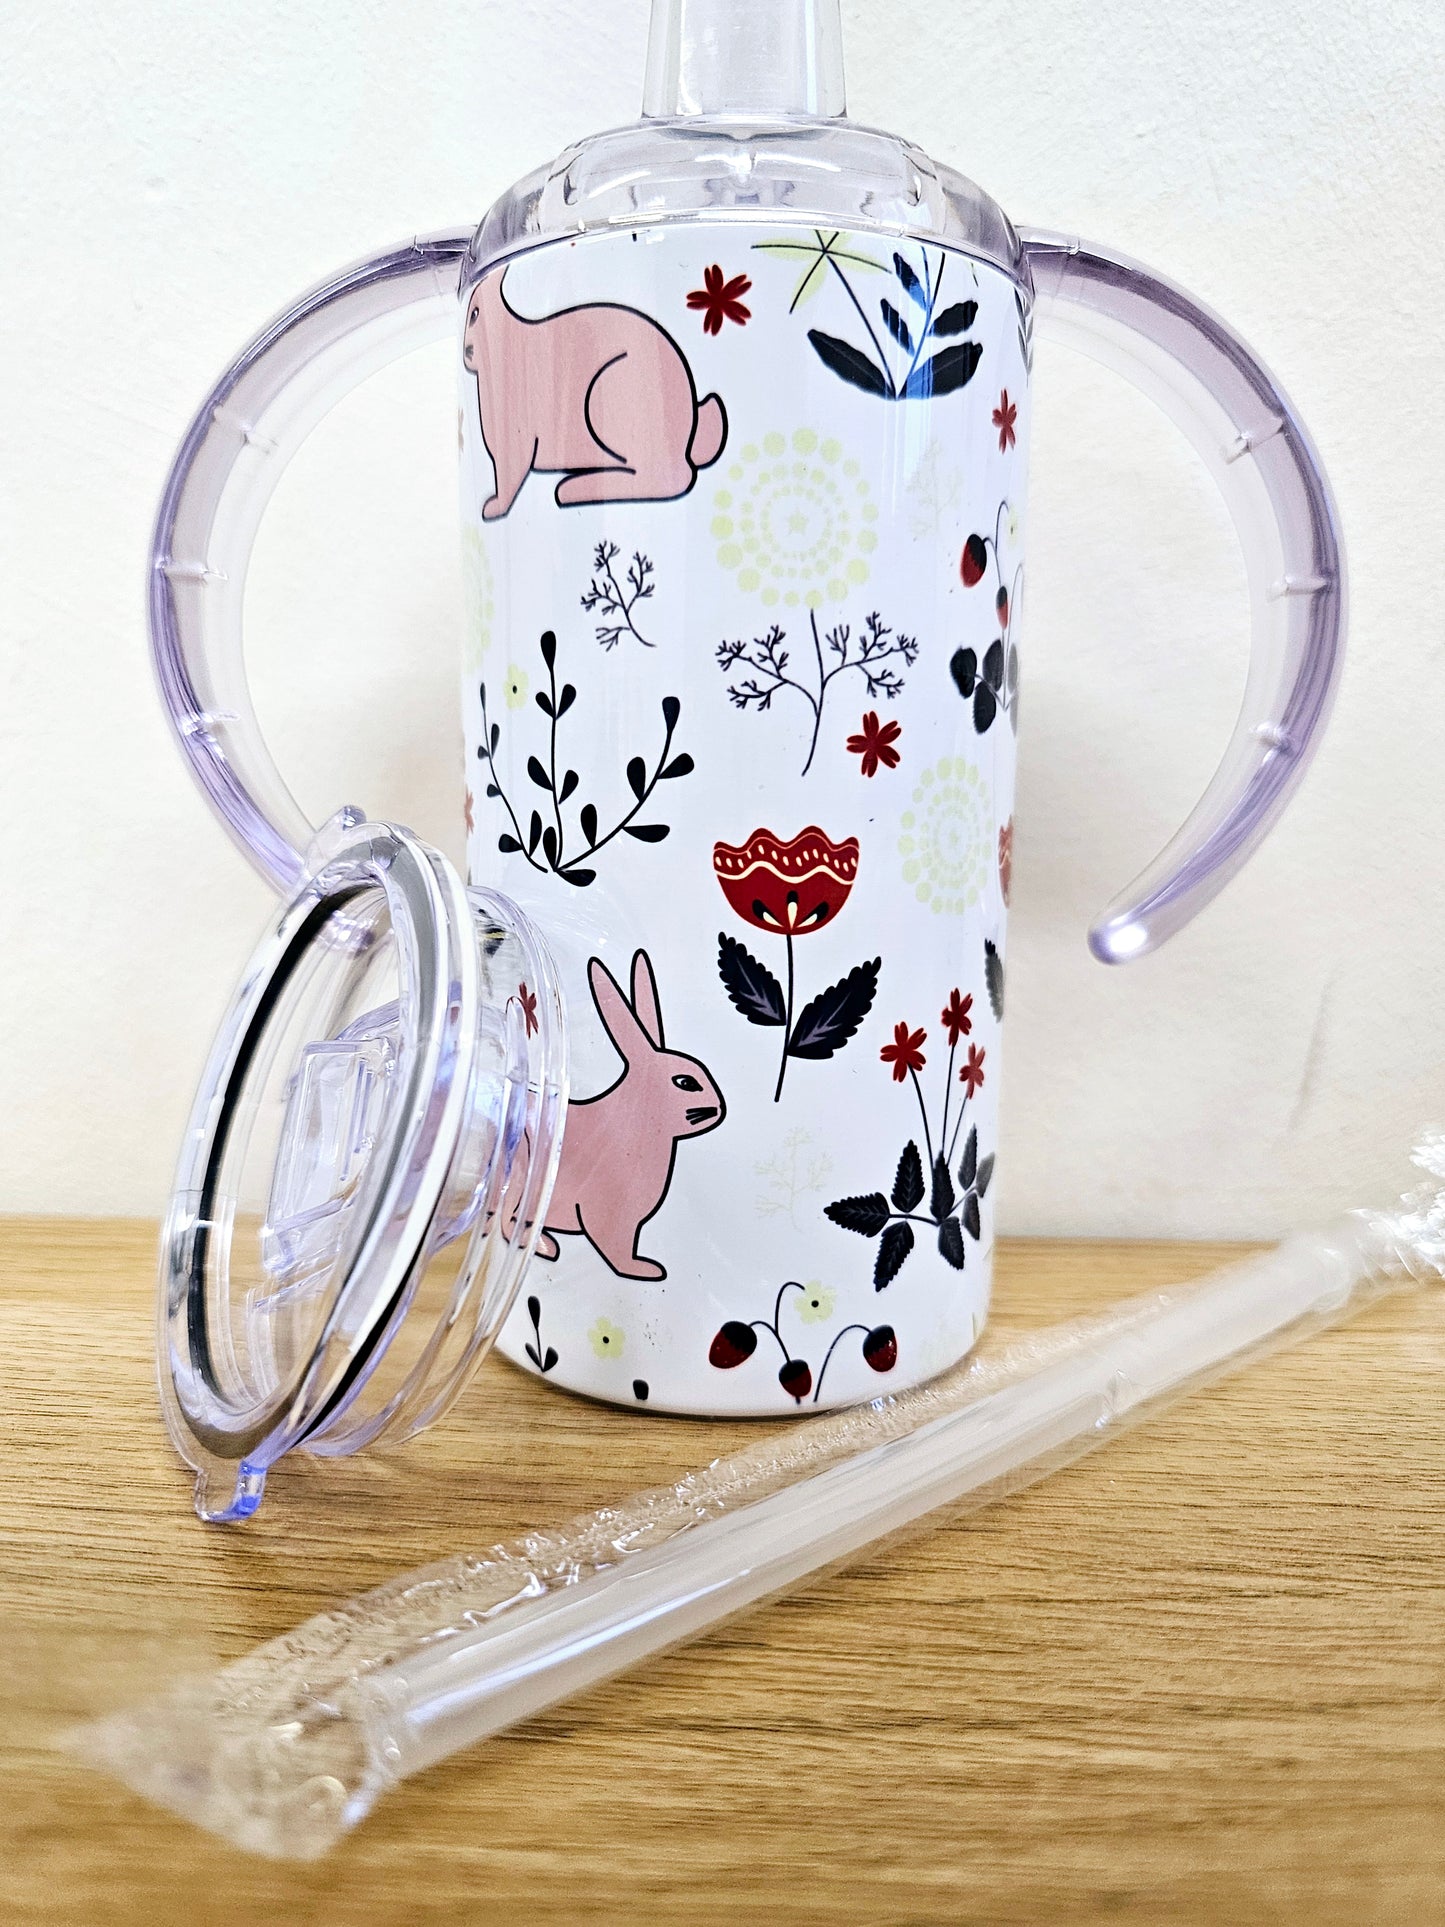 Sippy cup tumbler 12oz with double handle and straw lid rabbit and floral design.